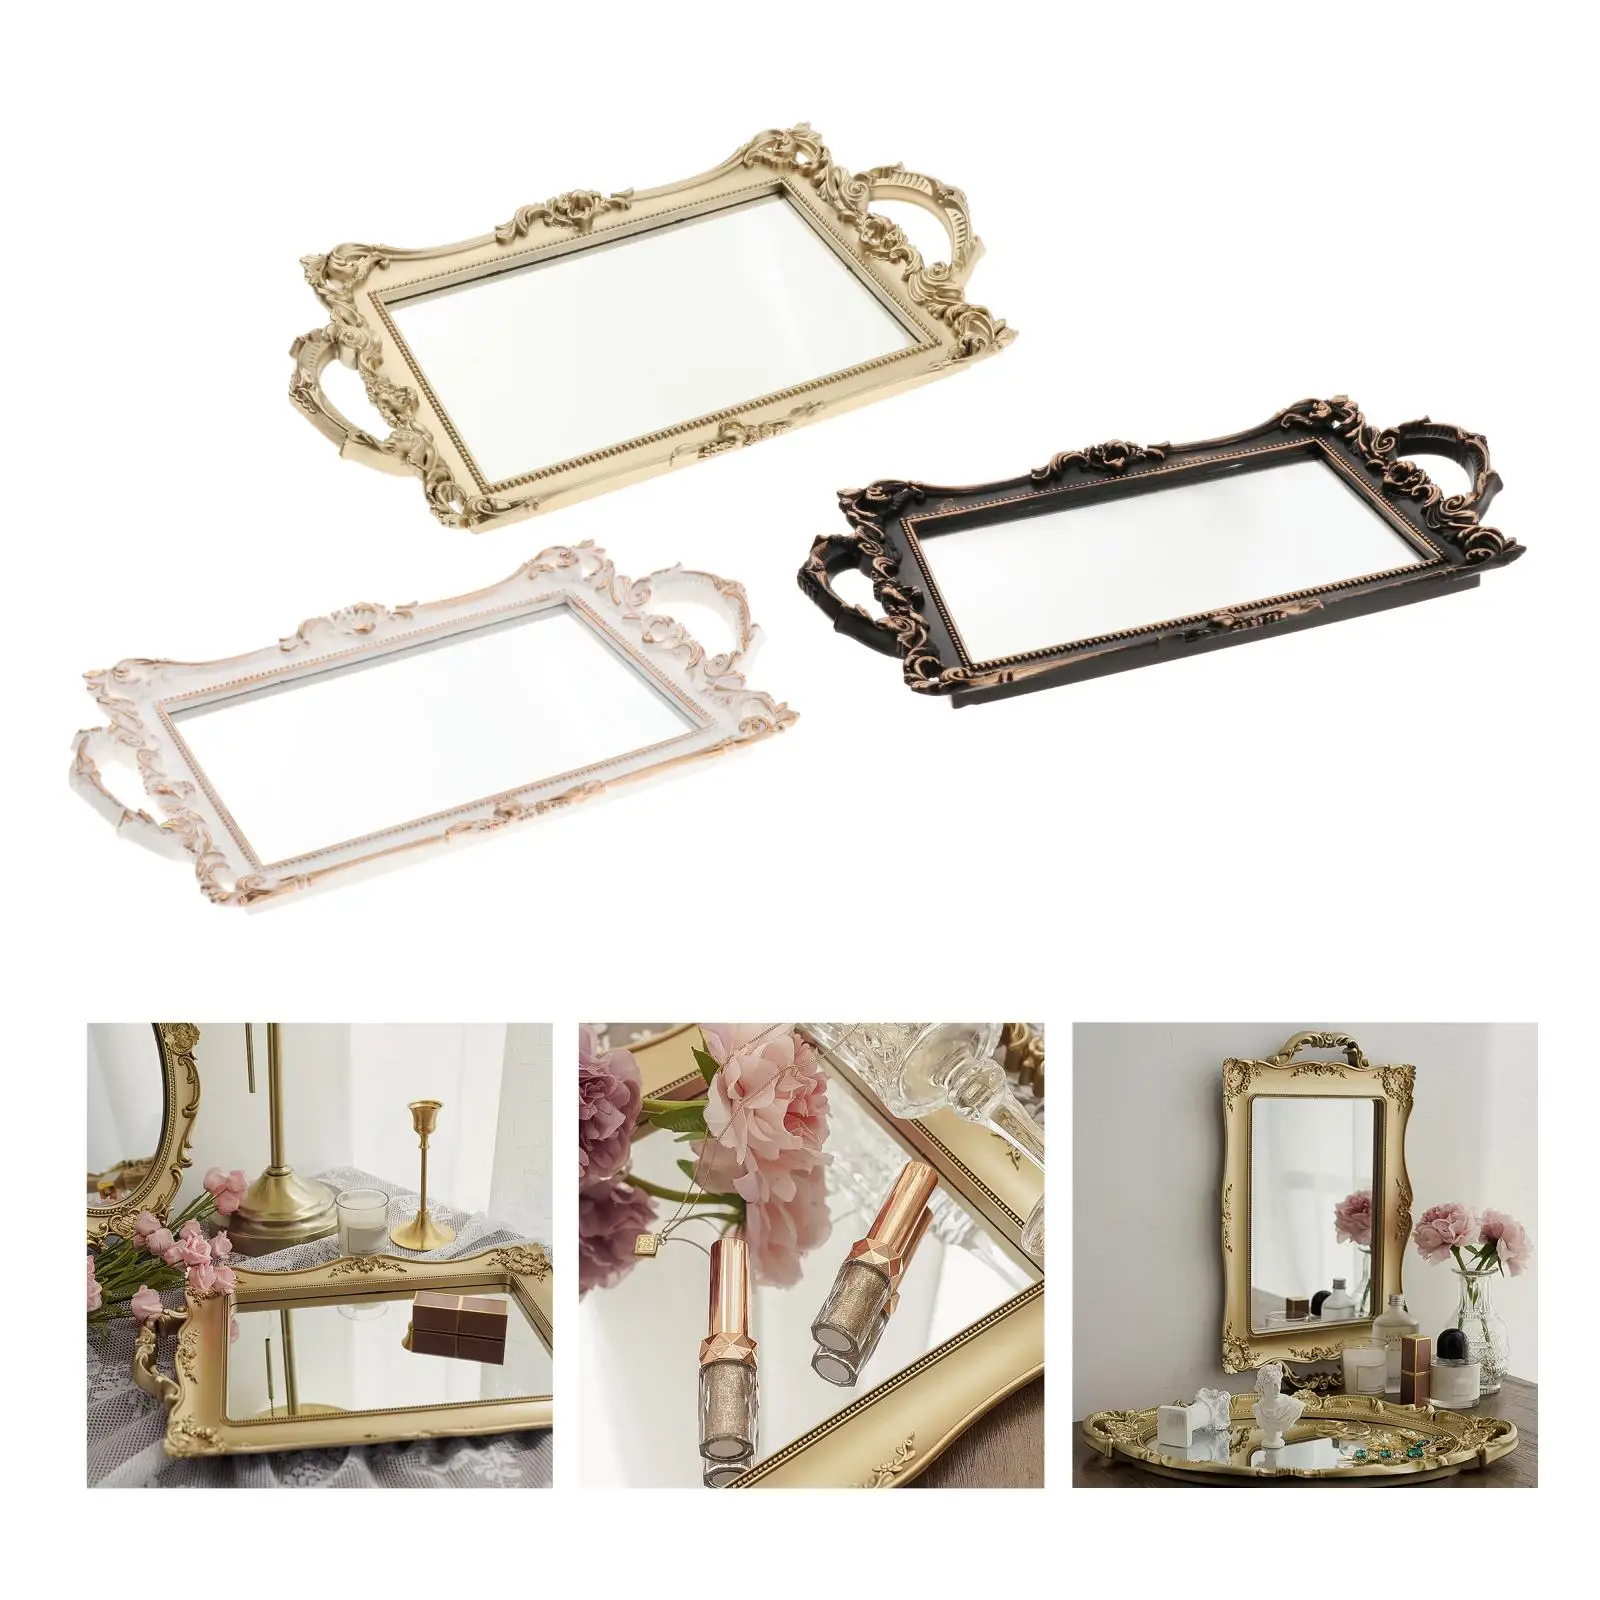 Mirrored Vintage Vanity Makeup Tray Ornate Jewelry Trinket Tray Organizer Cosmetic Perfume Serving Tray Home Dresser Decor